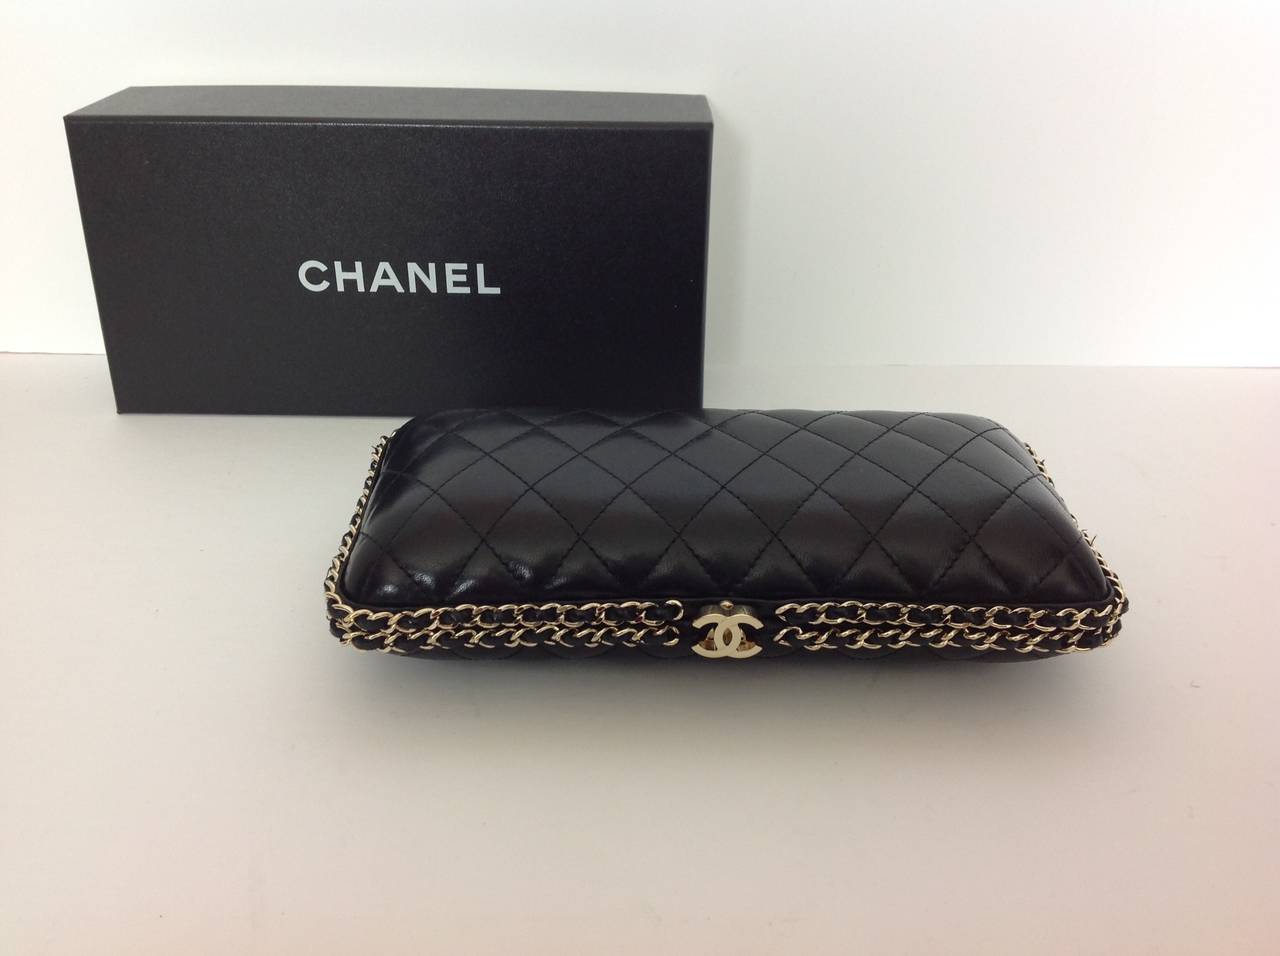 Hard CHANEL black clutch bag.  Excellent condition.  
Diamond quilted pattern in leather.  Double CC clasp.
Trimmed with double row mini gold chain interwoven with leather.
Hidden gold chain with inter woven leather  23